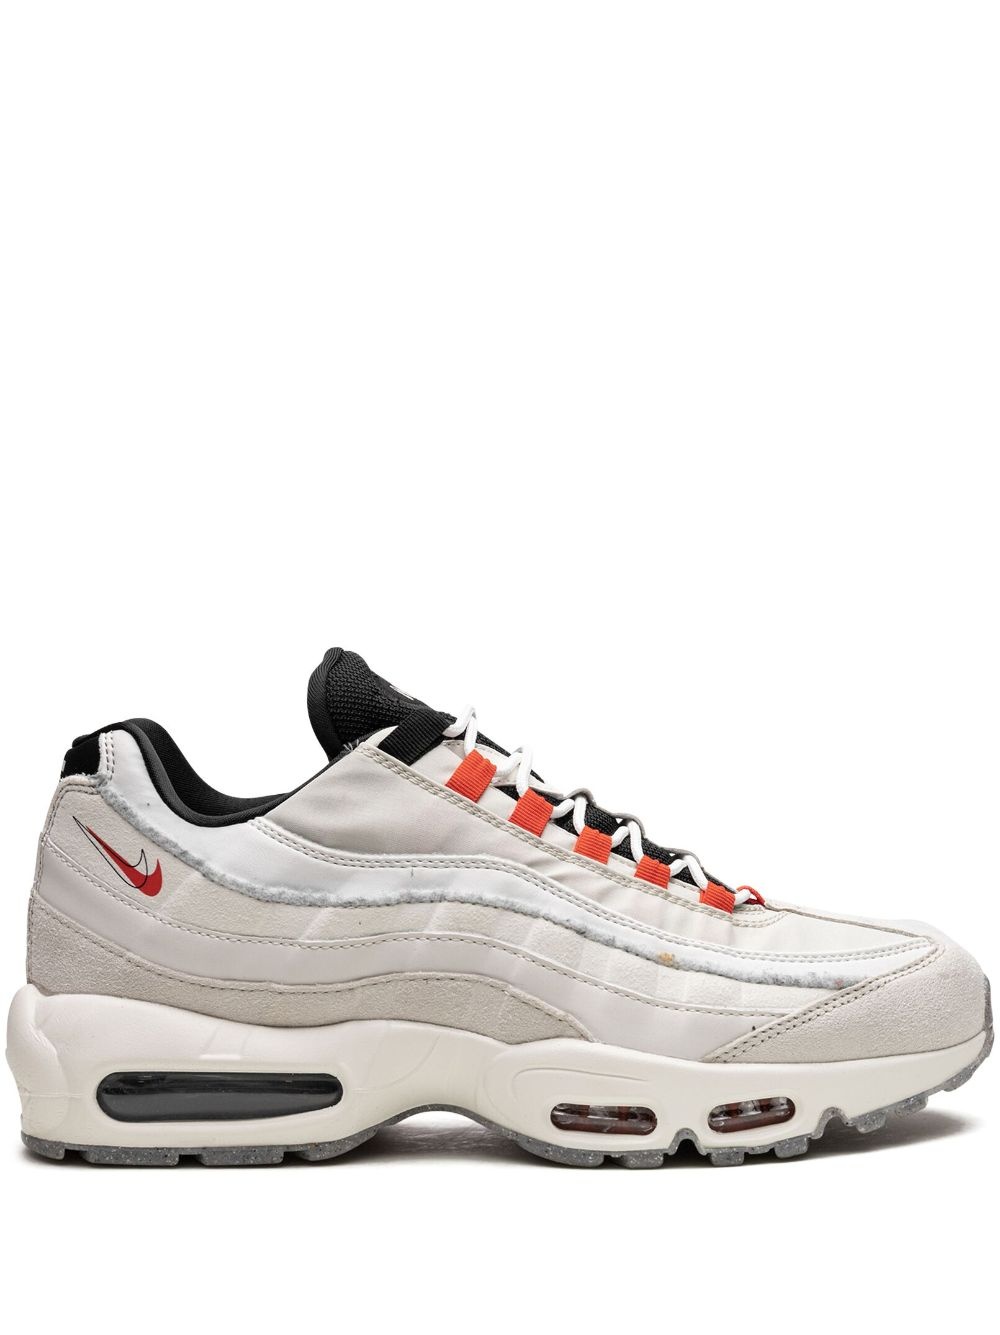 Air Max 95 SE "Double Swoosh" sneakers - 1